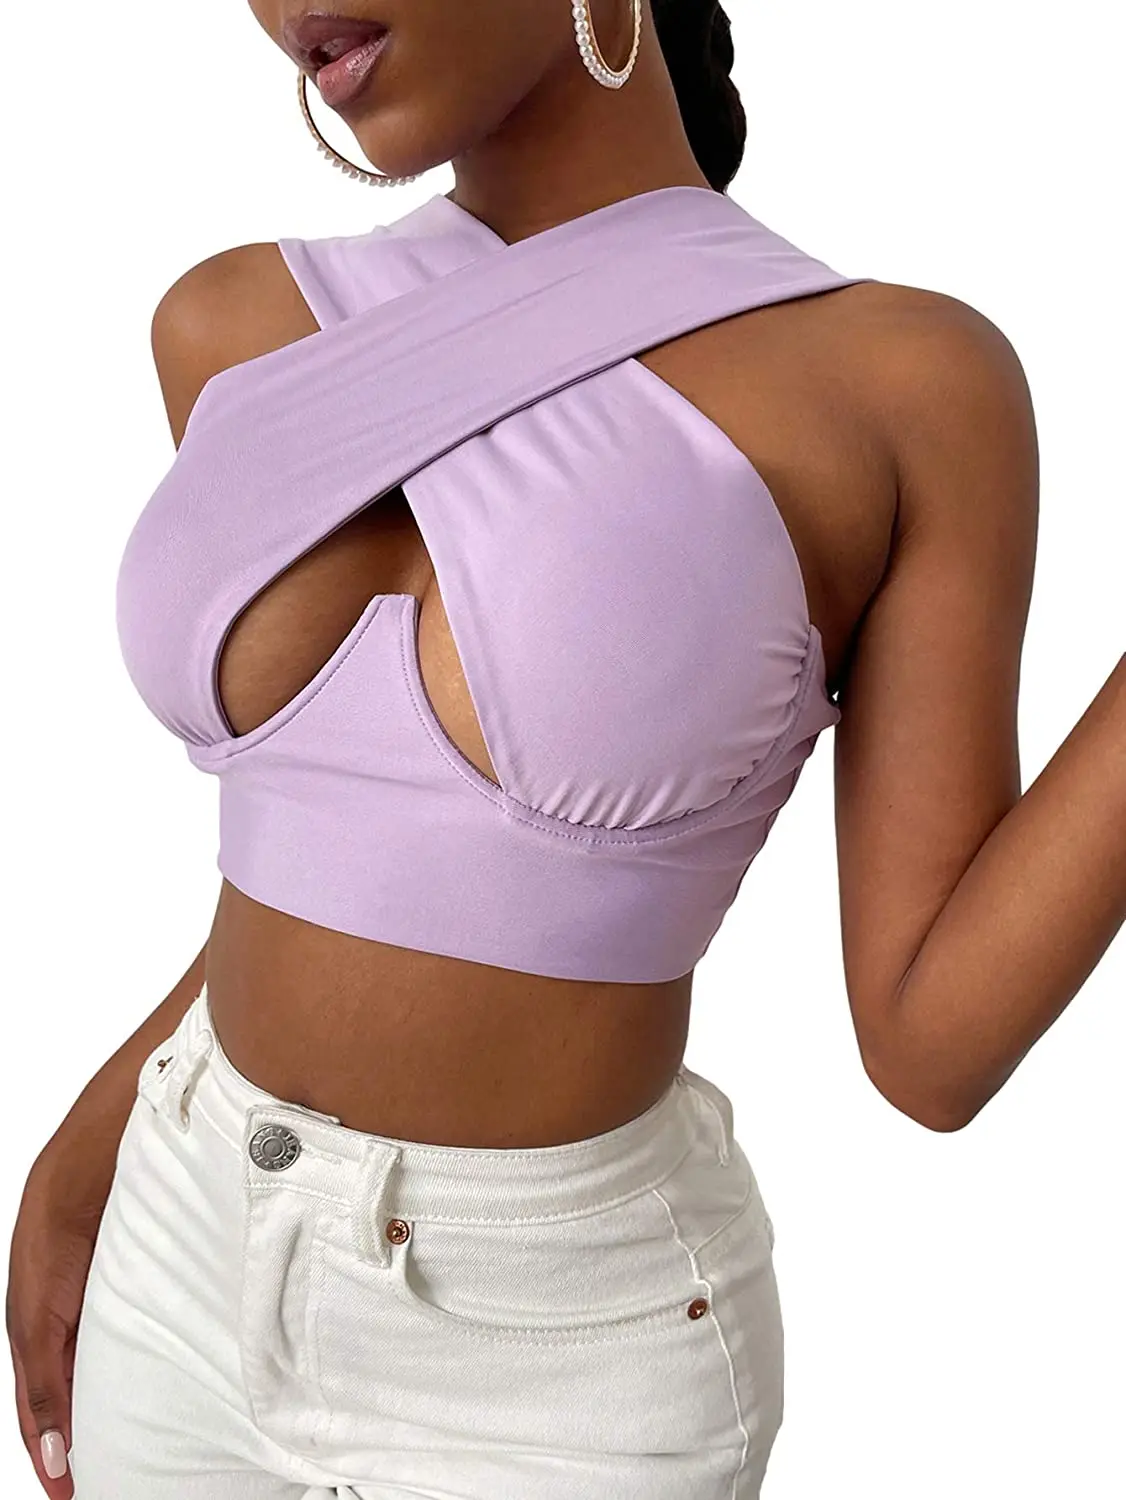 

Women's Criss Cross Tank Tops Sexy Sleeveless Solid Color / Printing Cutout Front Casual Crop Tops S/M/L/XL/2XL/3XL